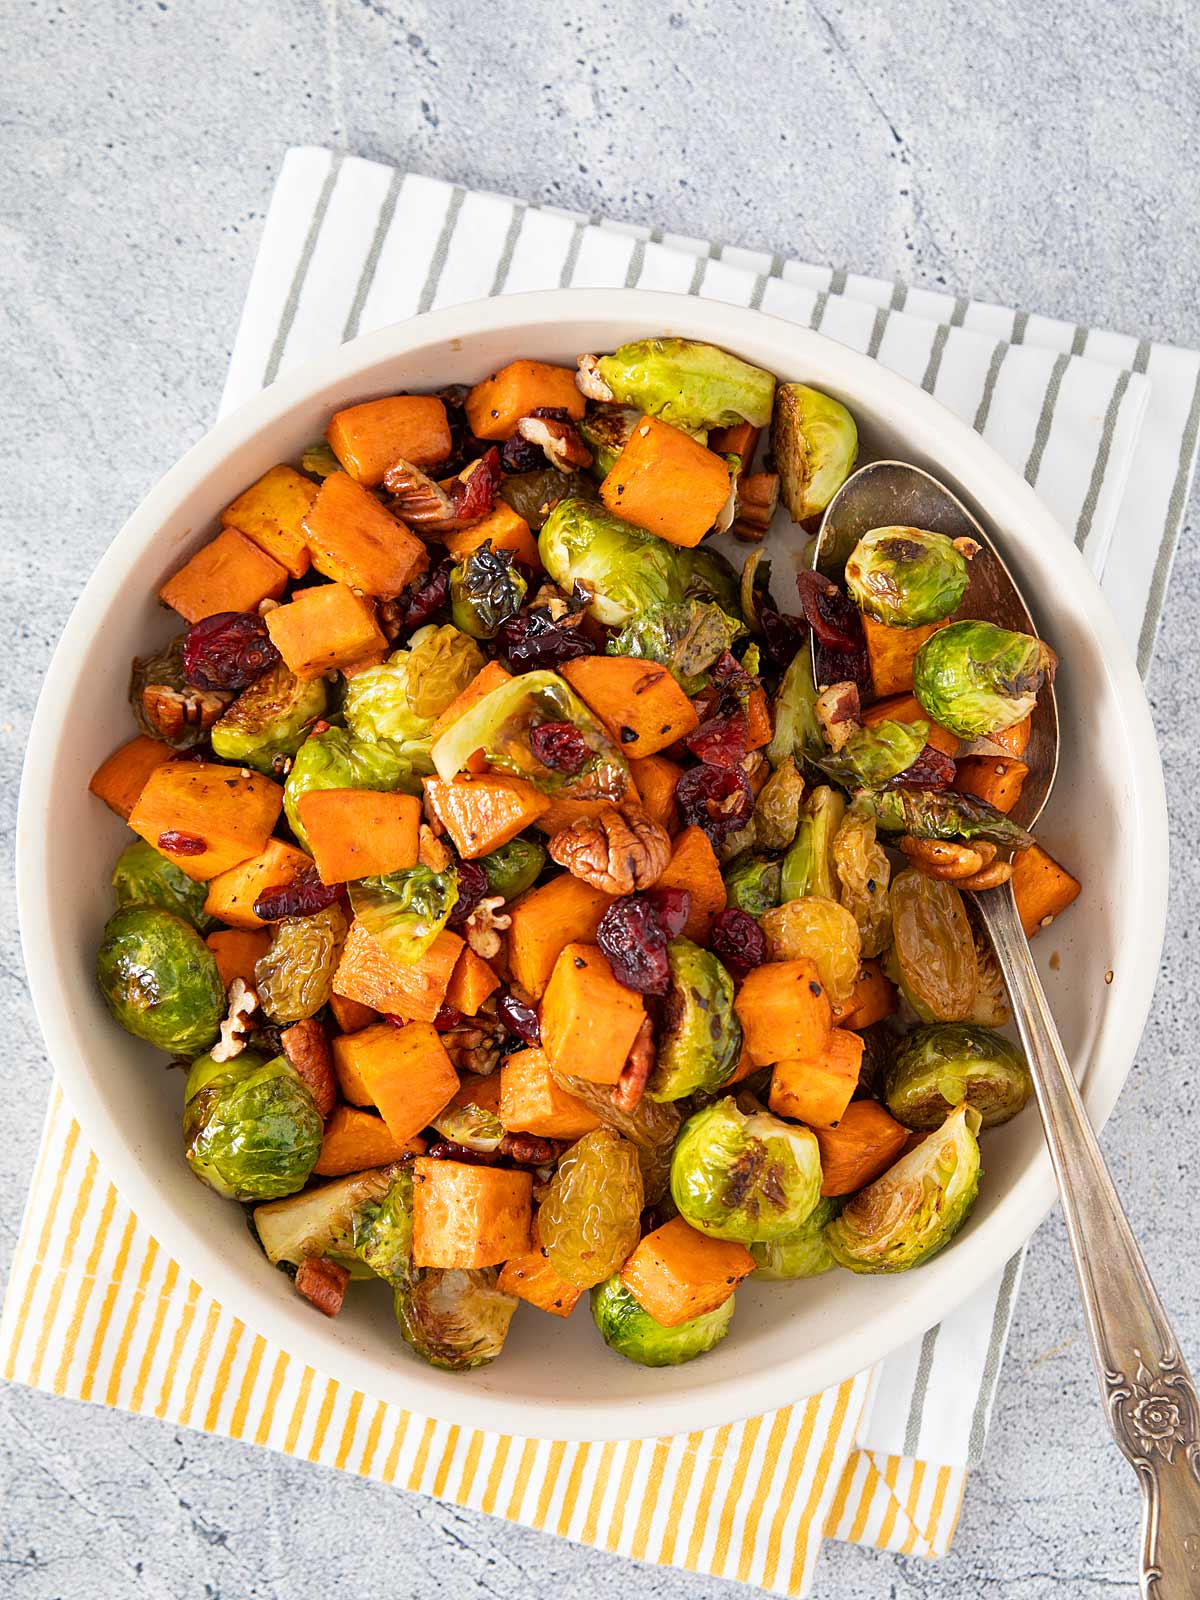 Bowl of Brussels Sprouts, Sweet potatoes, pecans, dried cranberries, and golden raisins.